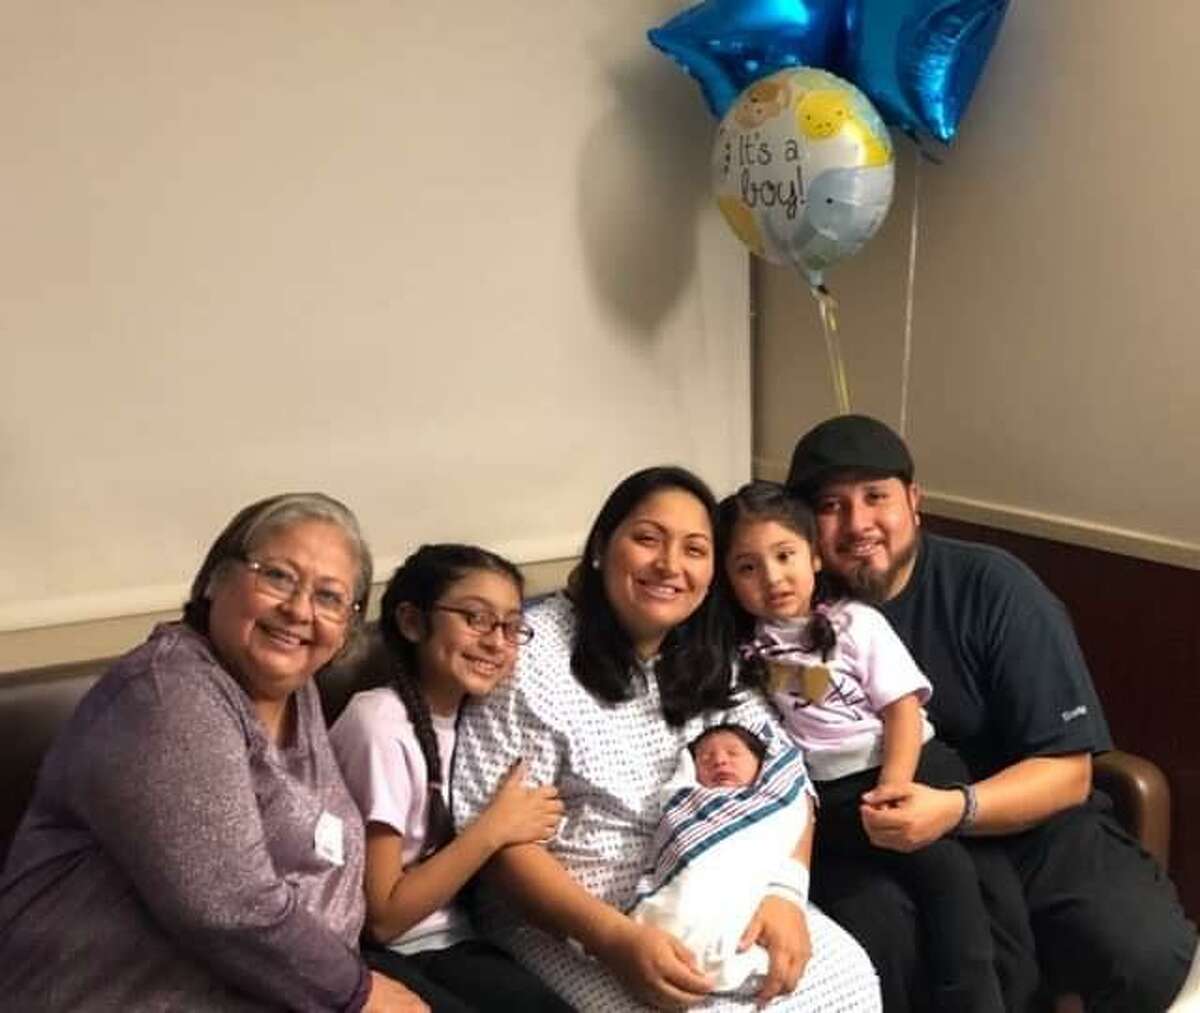 The Ramirez family welcomed newborn son Richard Eugene just 22 seconds after midnight. Here Maria Ramirez holding the baby poses for a picture with her mother-in-law, Virginia Sanchez, her daughters Bridgette Nicole, 9 and Ellianne Marie, 2 and husband Gerardo